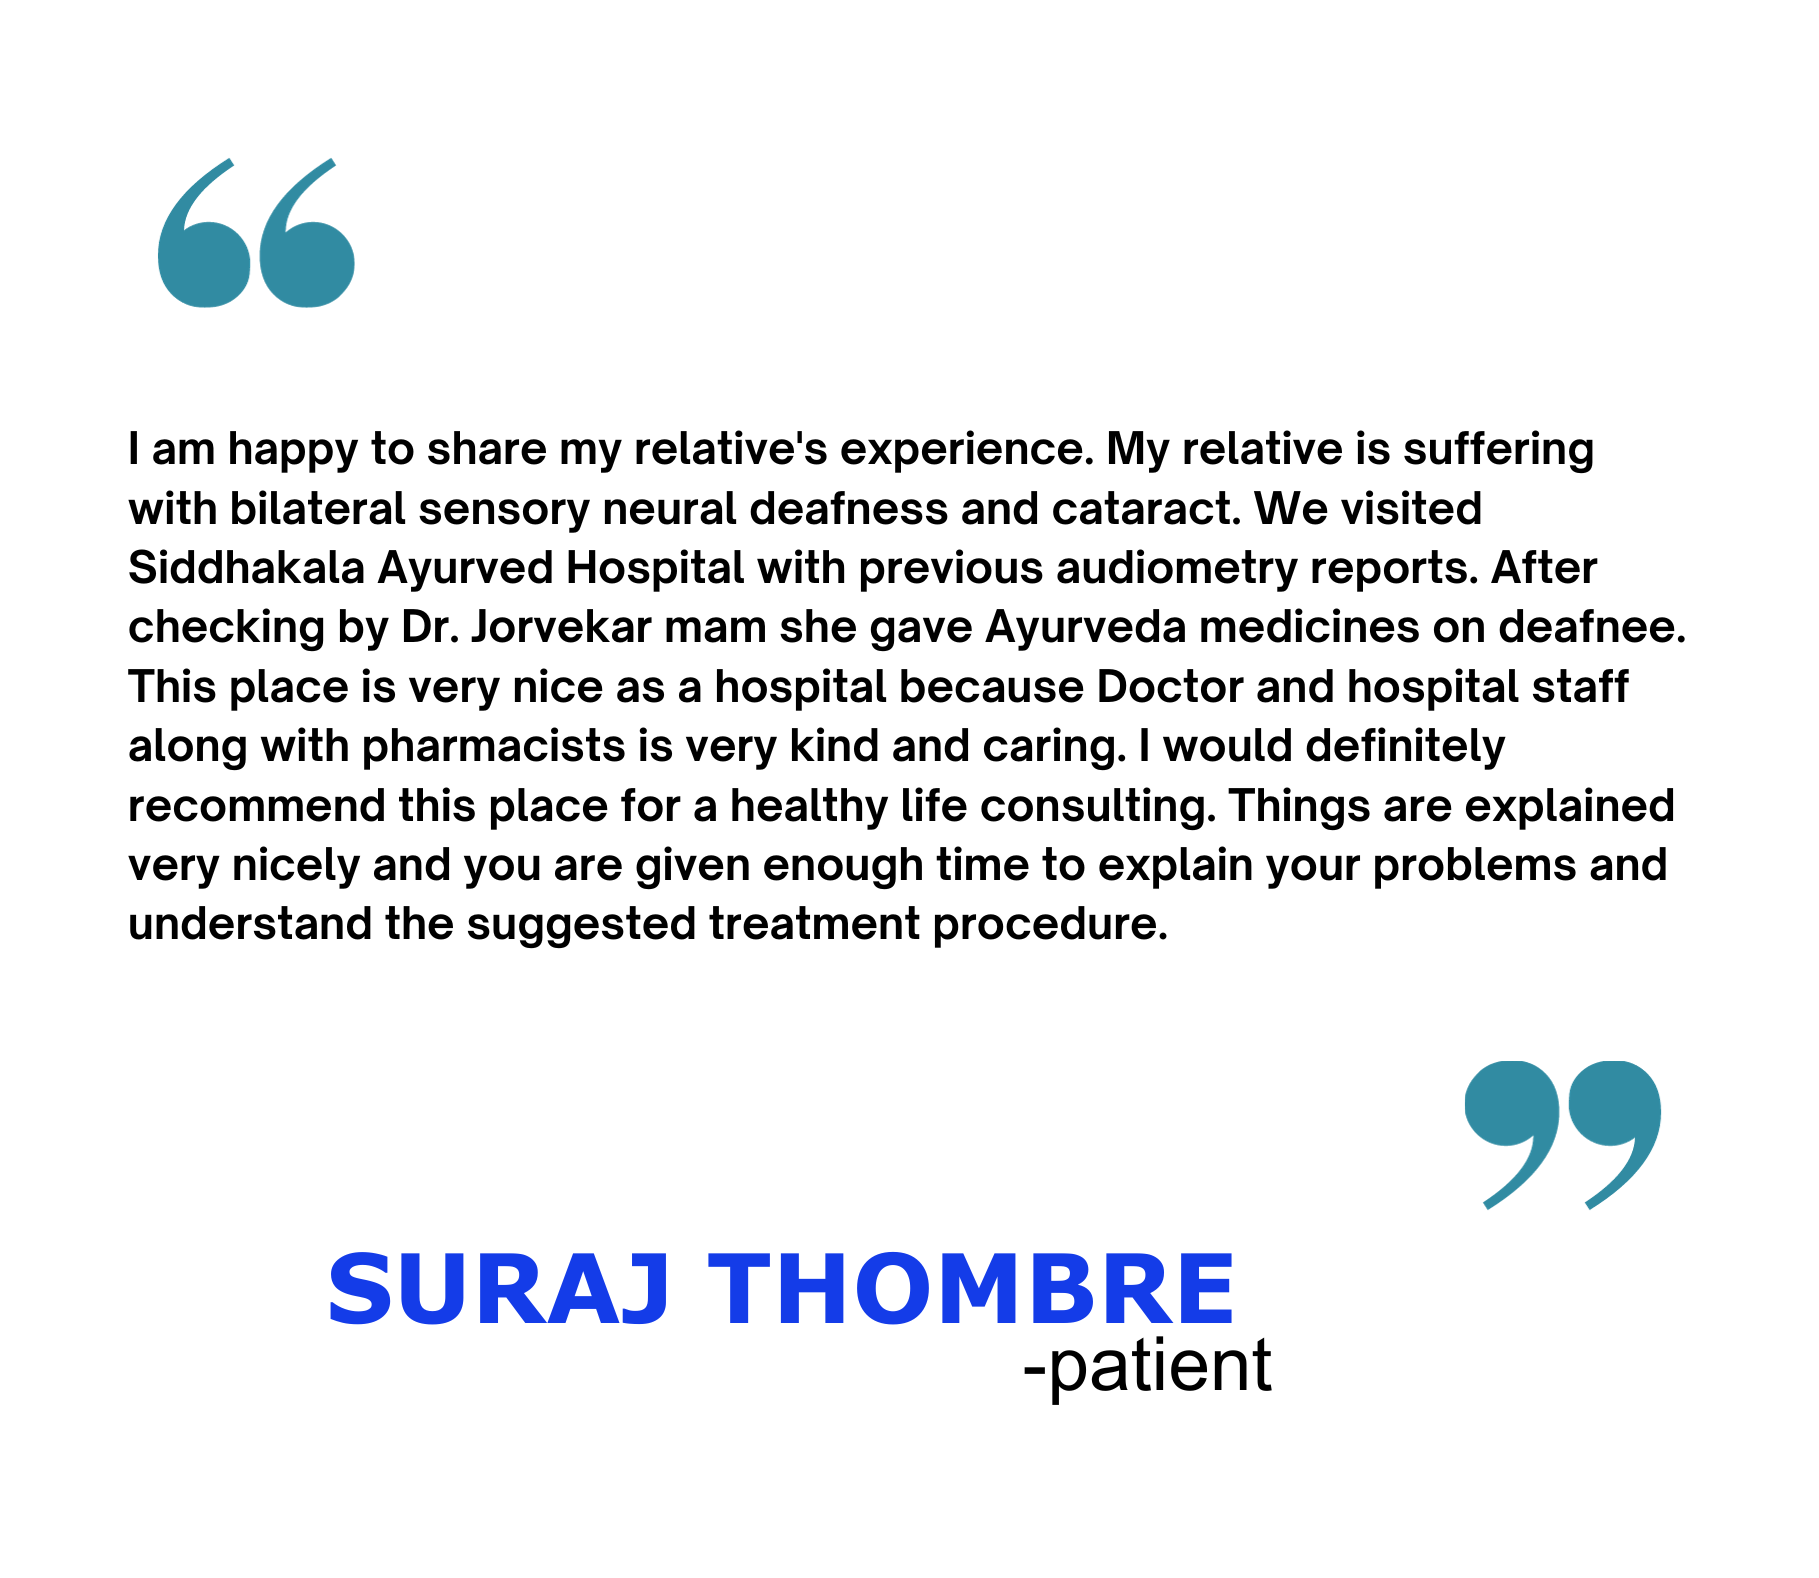 I am happy to share my relative's experience. My relative is suffering with bilateral sensory neural deafness and cataract. We visited Siddhakala Ayurved Hospital with previous audiometry reports.